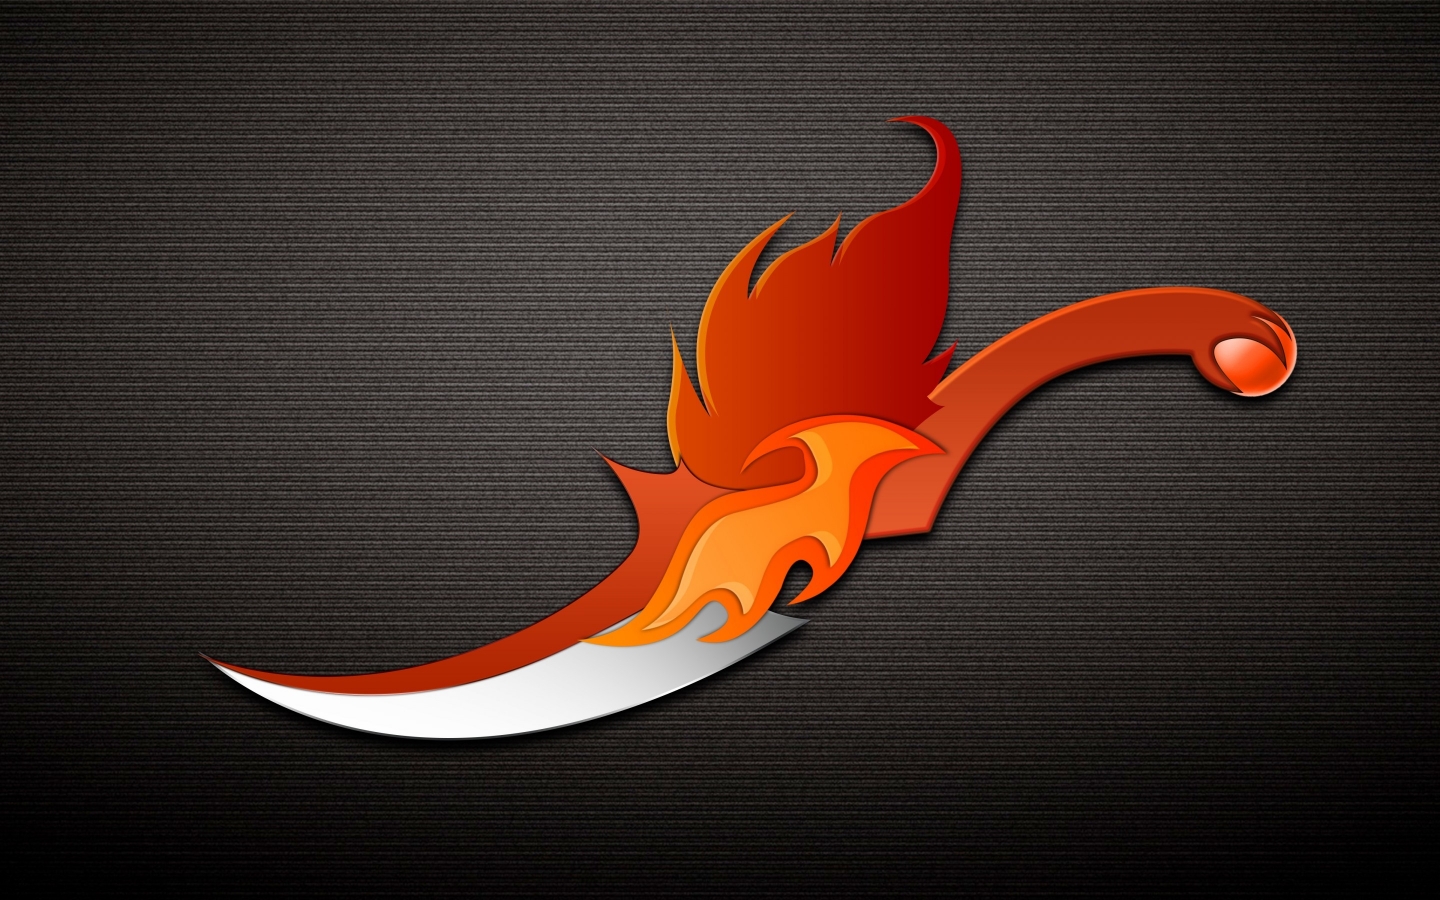 Fantasy Knife for 1440 x 900 widescreen resolution